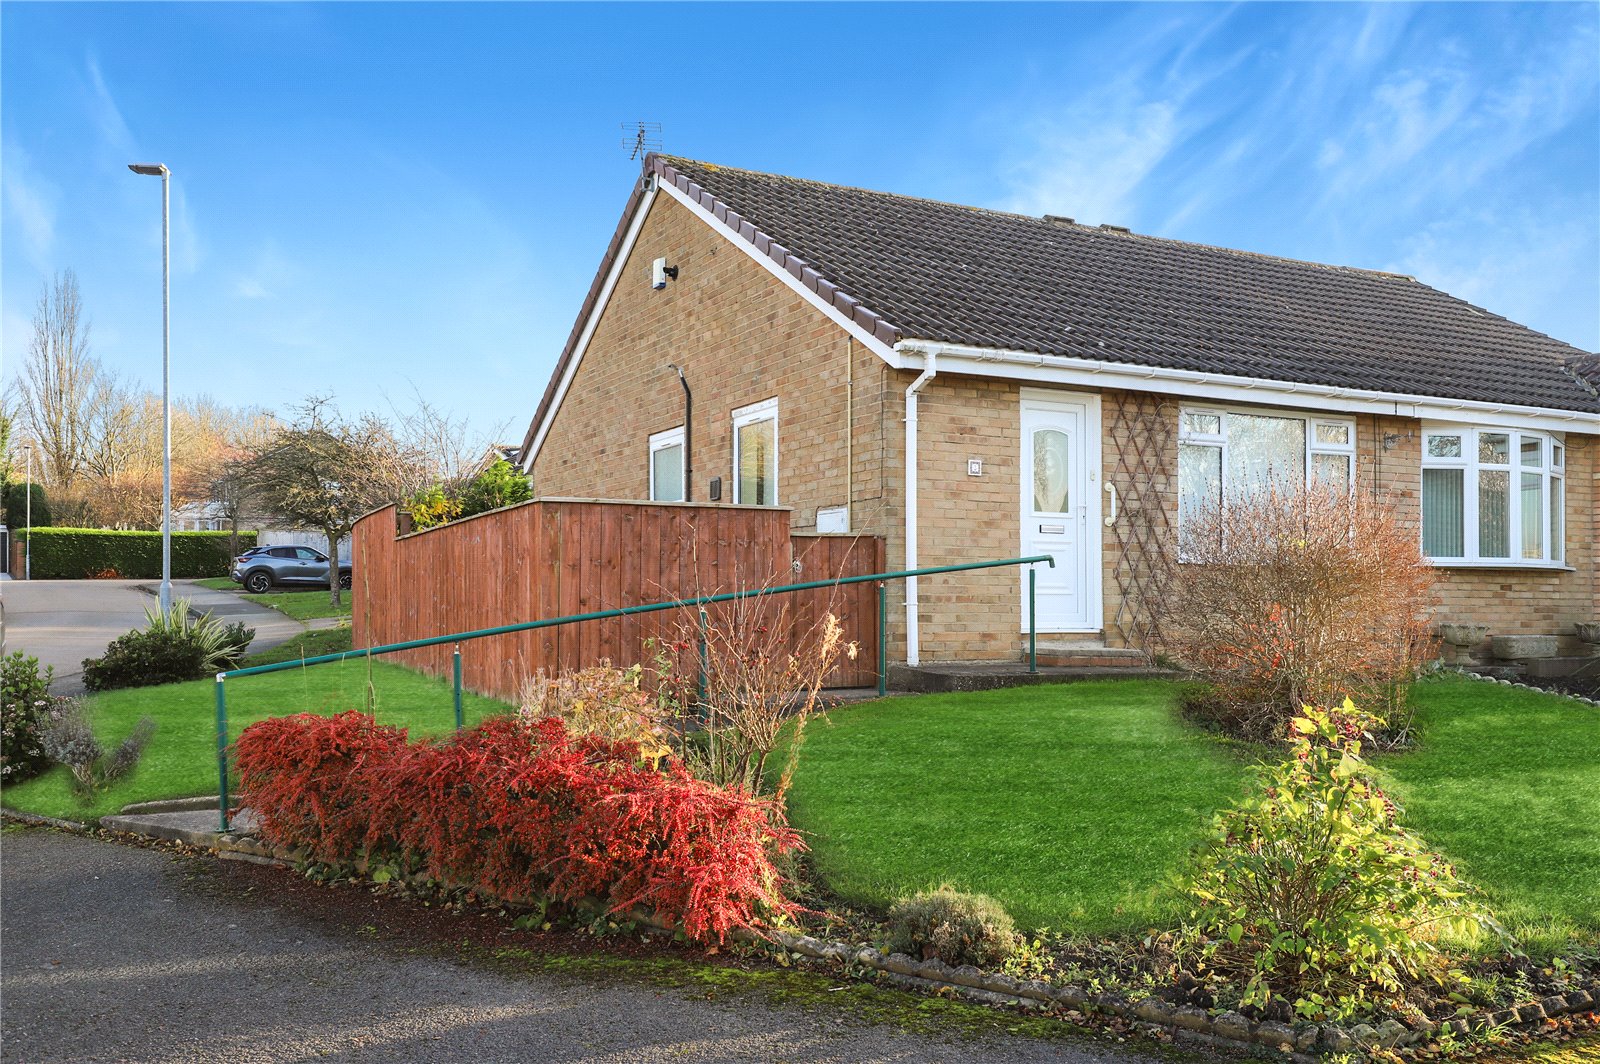 2 bed bungalow for sale in Kennthorpe, Nunthorpe - Property Image 1